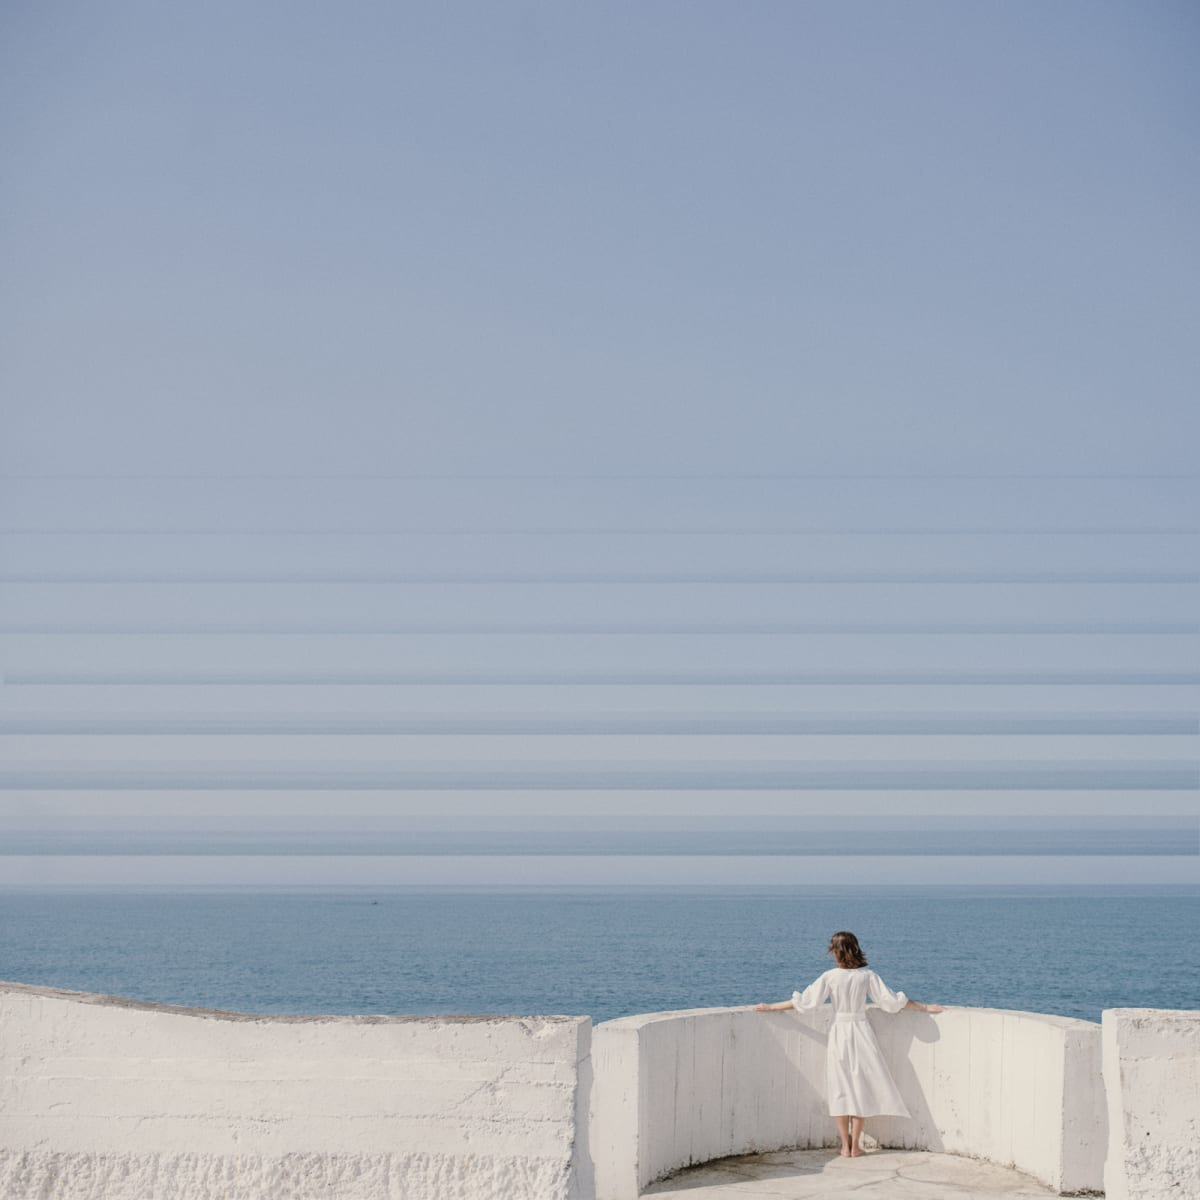 Into The Blue by Dasha Pears  Image: Melting away into the blue. Losing all thoughts, desires, and goals. Just blending with the sky and becoming a drop in the ocean.